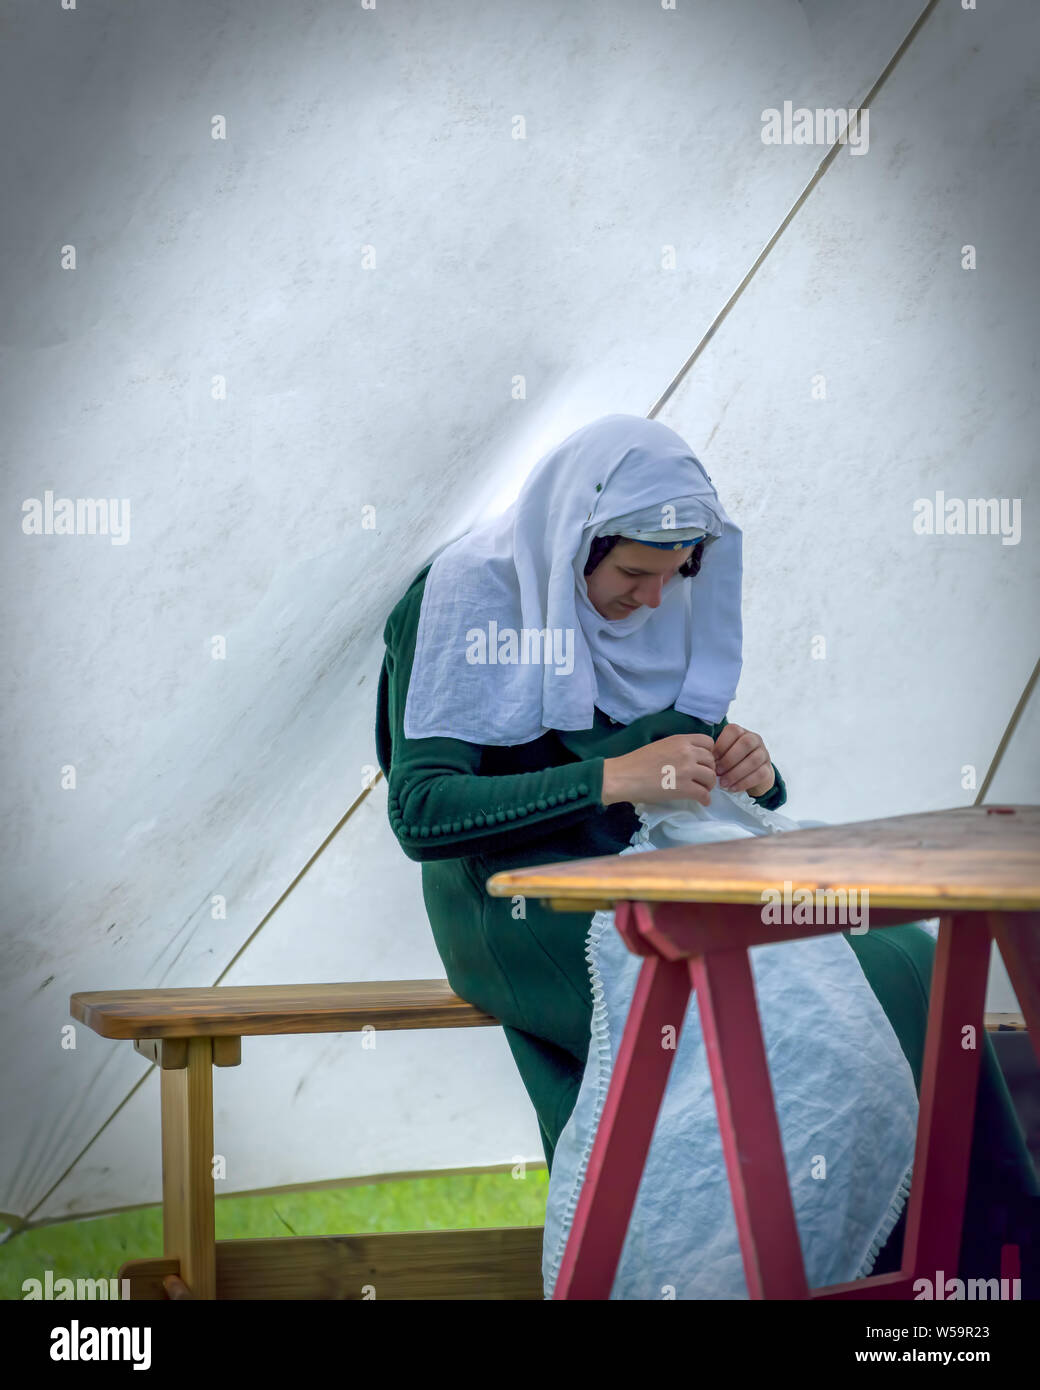 Woman in authentic medieval costume sat on a bench and table, sewing in a tent. The encampment at Cardiff Joust 2019. Stock Photo